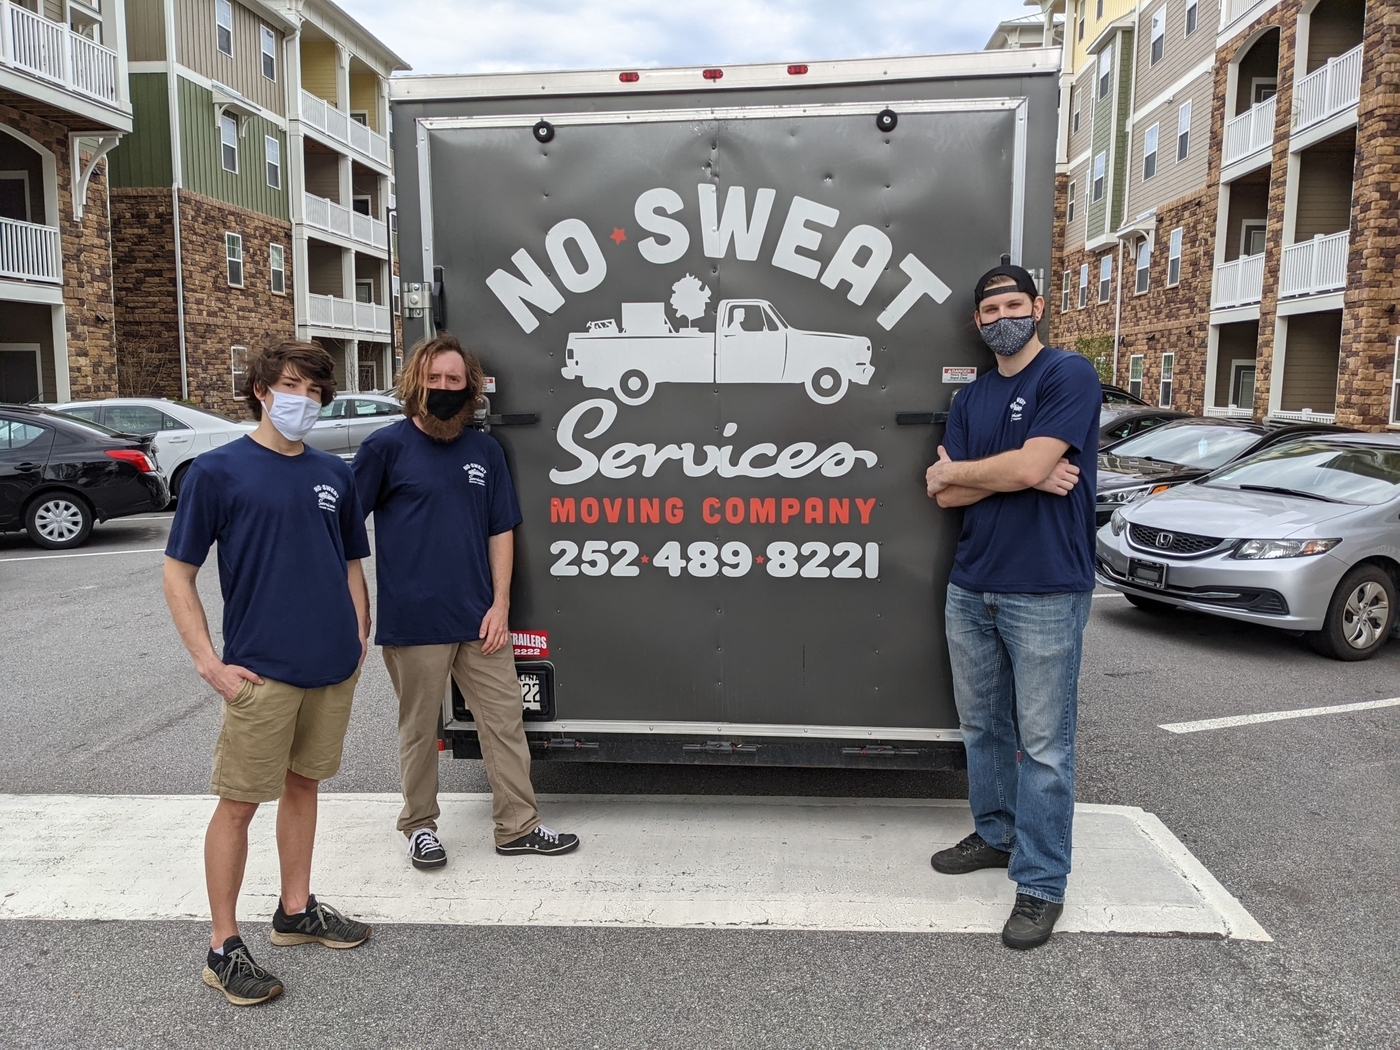 No Sweat Services Inc is a family-owned moving company based in Cary, NC. With a dedication to providing high-quality, stress-free moving solutions